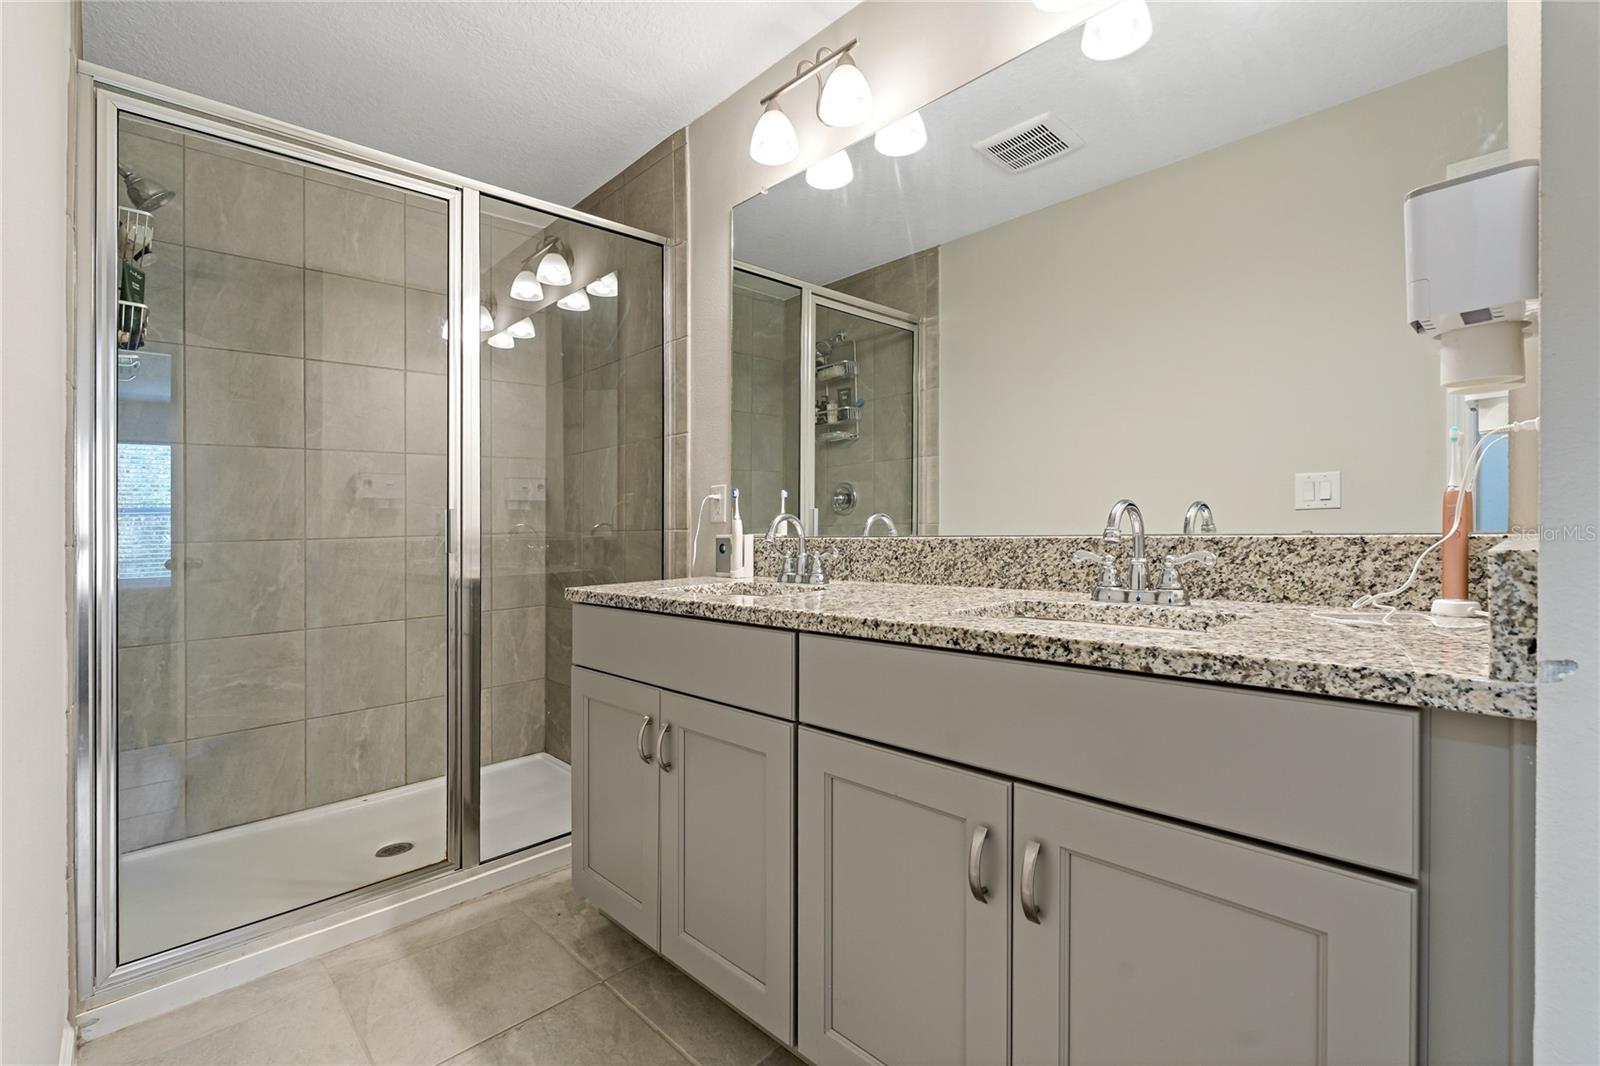 Dual Sinks With Granite Countertops & Glass Enclosed Shower